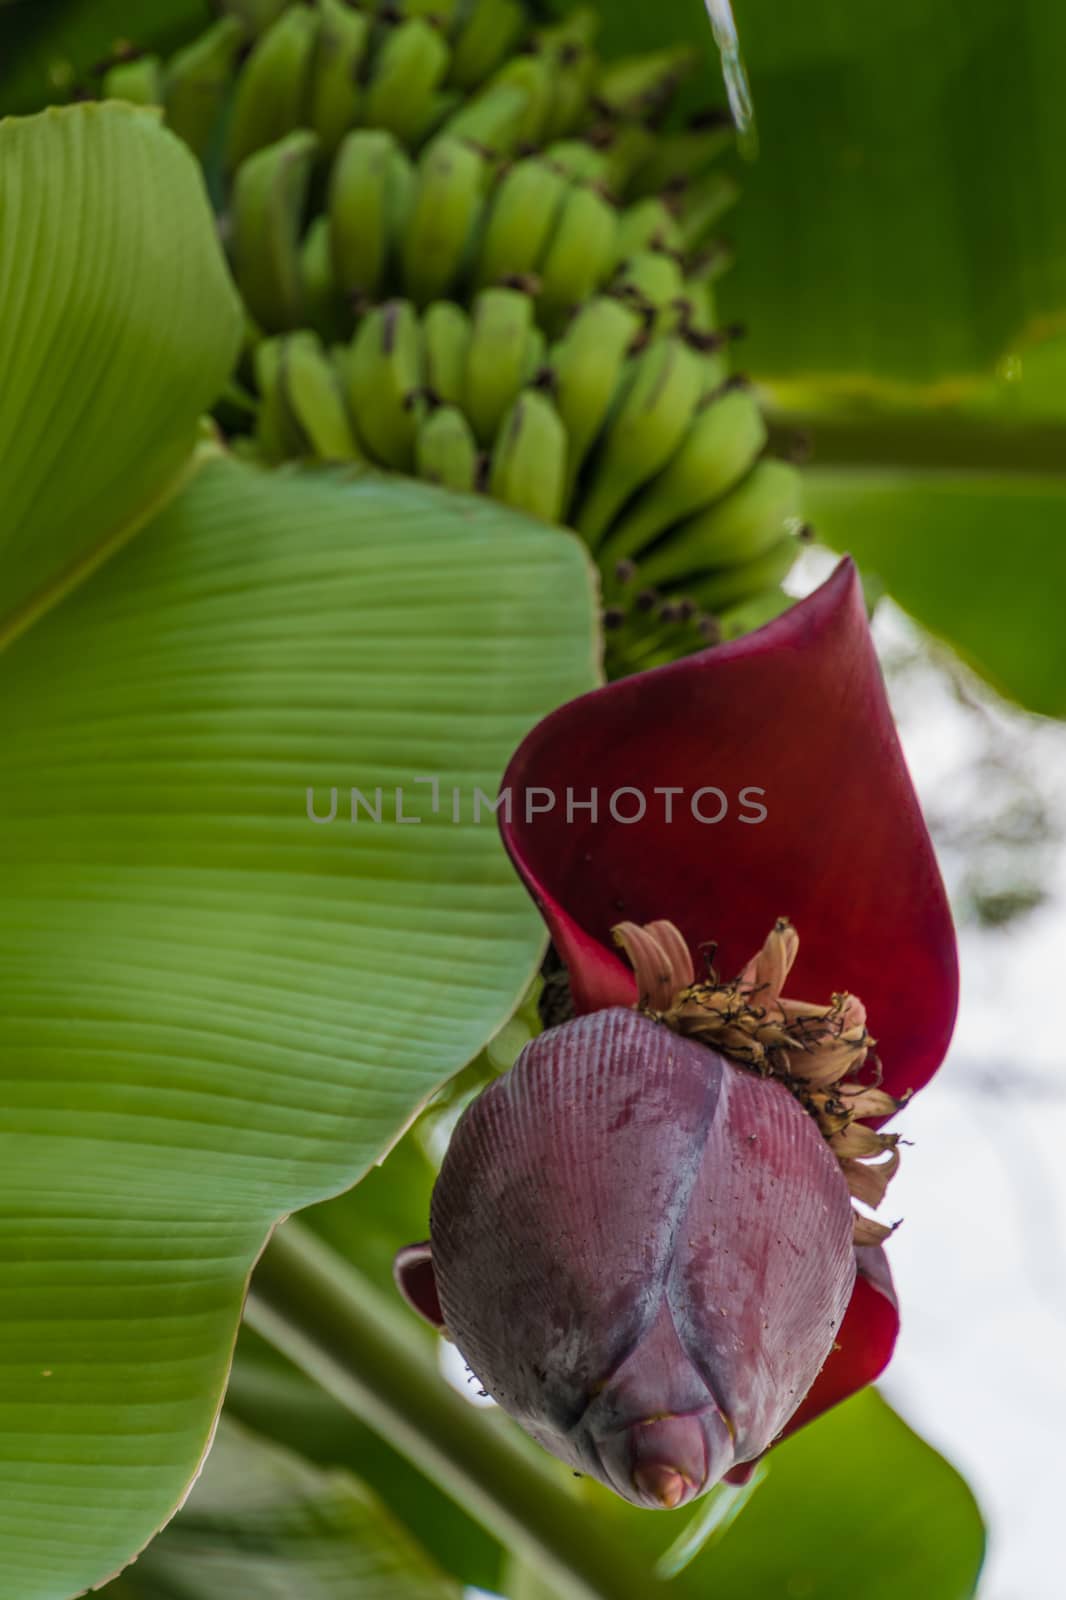 Blossom and leafs of banana tree with green bananas by MXW_Stock